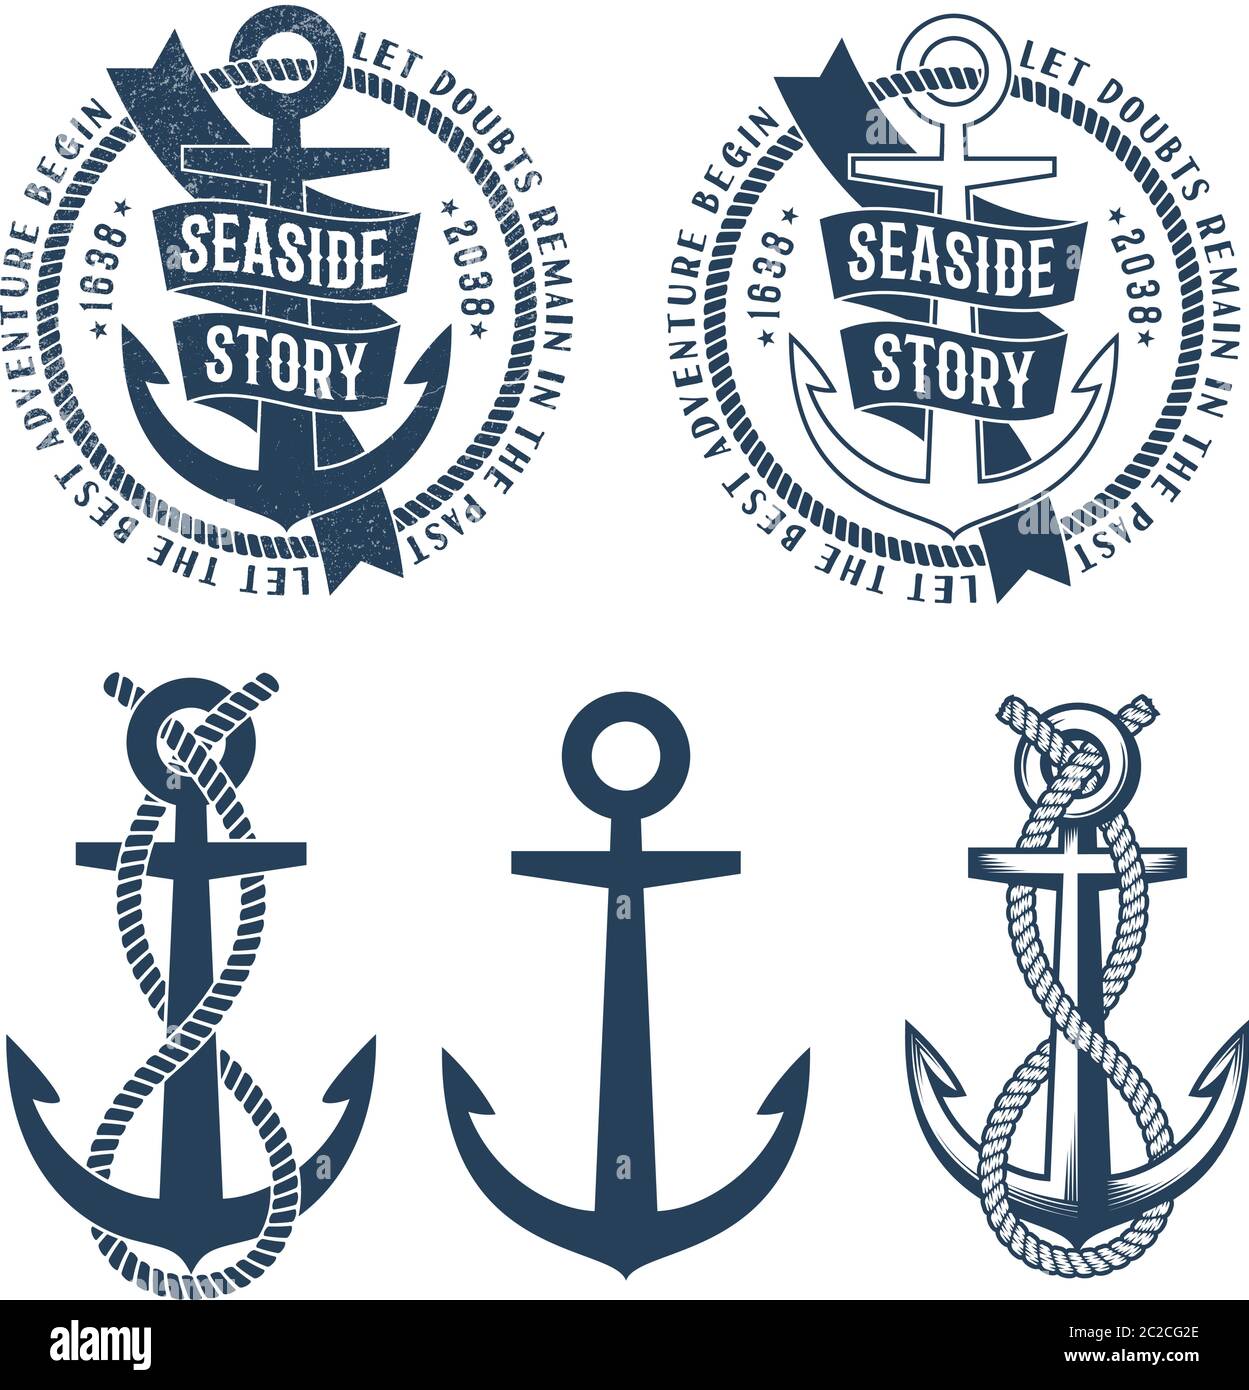 1202 Tribal Anchor Images Stock Photos  Vectors  Shutterstock